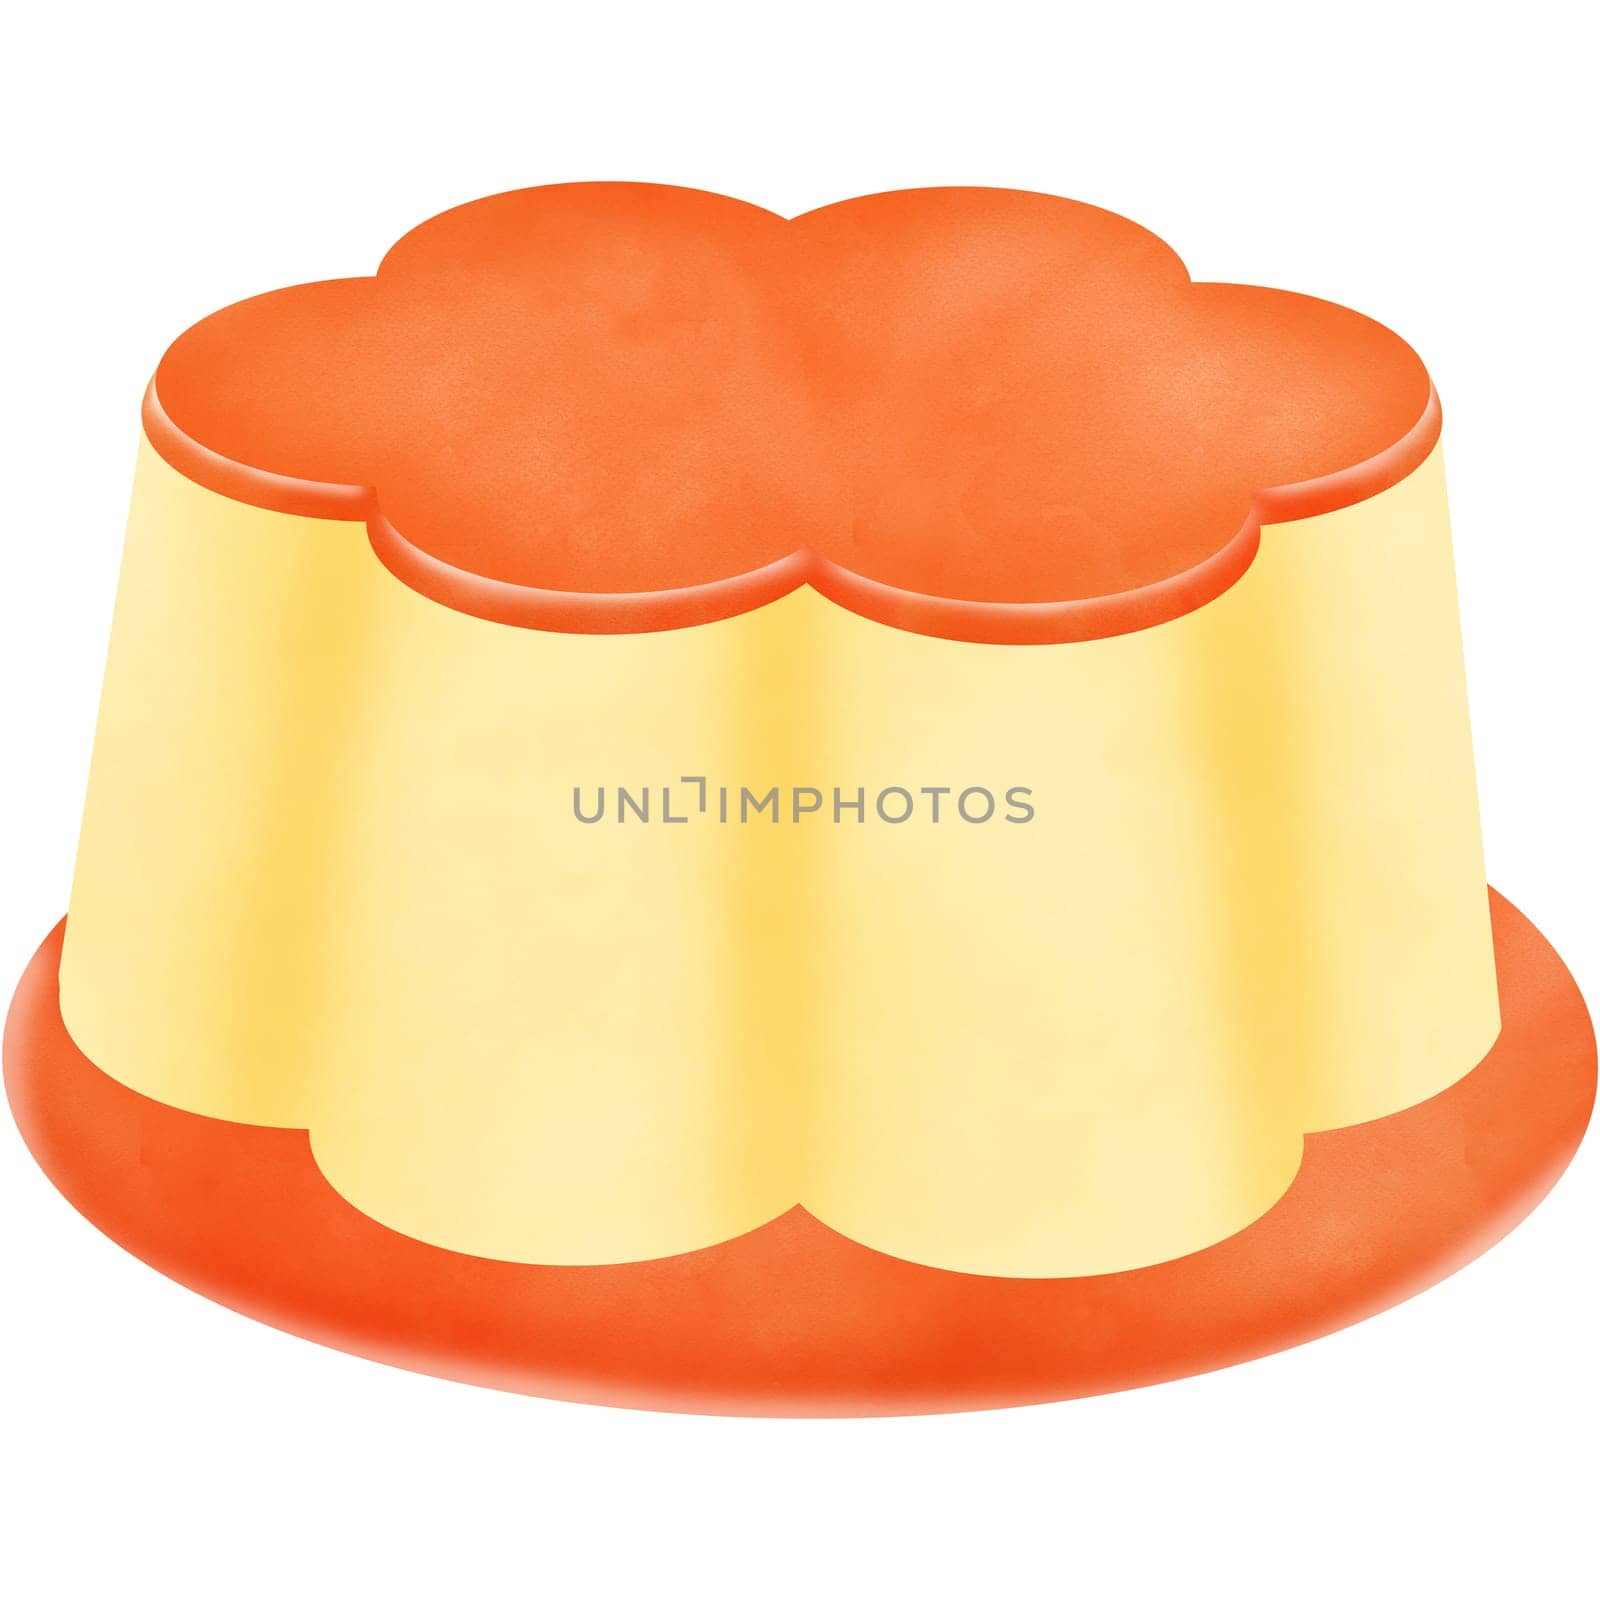 An illustration of a custard pudding cake isolated on a white background provides a visually appealing representation of this delectable dessert